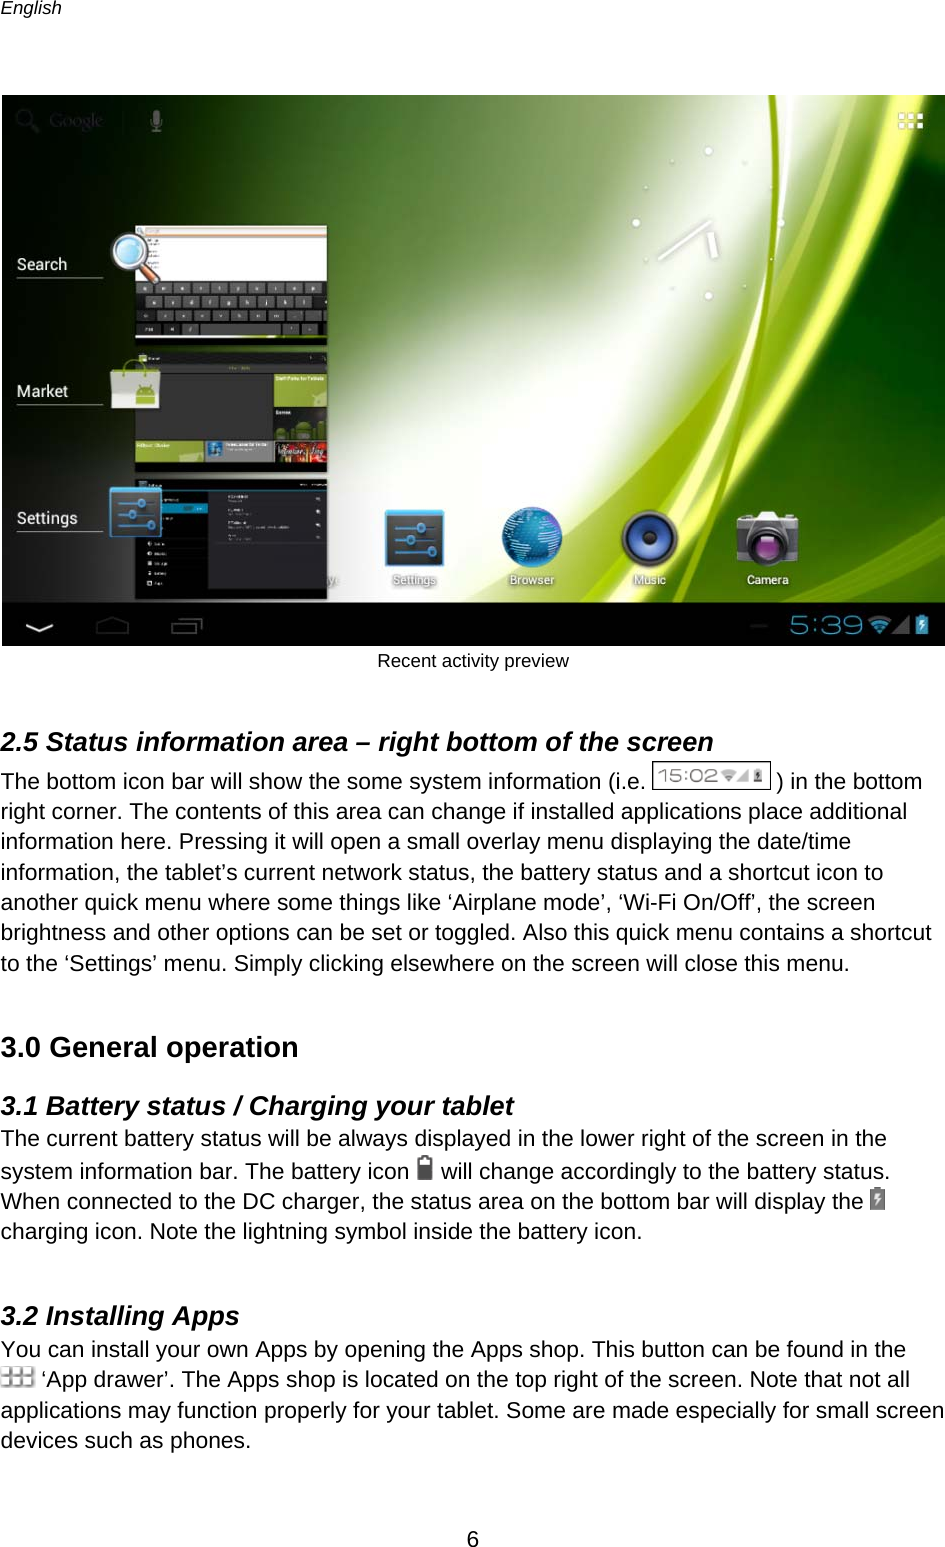 English      6   Recent activity preview  2.5 Status information area – right bottom of the screen The bottom icon bar will show the some system information (i.e.   ) in the bottom right corner. The contents of this area can change if installed applications place additional information here. Pressing it will open a small overlay menu displaying the date/time information, the tablet’s current network status, the battery status and a shortcut icon to another quick menu where some things like ‘Airplane mode’, ‘Wi-Fi On/Off’, the screen brightness and other options can be set or toggled. Also this quick menu contains a shortcut to the ‘Settings’ menu. Simply clicking elsewhere on the screen will close this menu. 3.0 General operation 3.1 Battery status / Charging your tablet The current battery status will be always displayed in the lower right of the screen in the system information bar. The battery icon   will change accordingly to the battery status.  When connected to the DC charger, the status area on the bottom bar will display the   charging icon. Note the lightning symbol inside the battery icon.  3.2 Installing Apps You can install your own Apps by opening the Apps shop. This button can be found in the  ‘App drawer’. The Apps shop is located on the top right of the screen. Note that not all applications may function properly for your tablet. Some are made especially for small screen devices such as phones.  